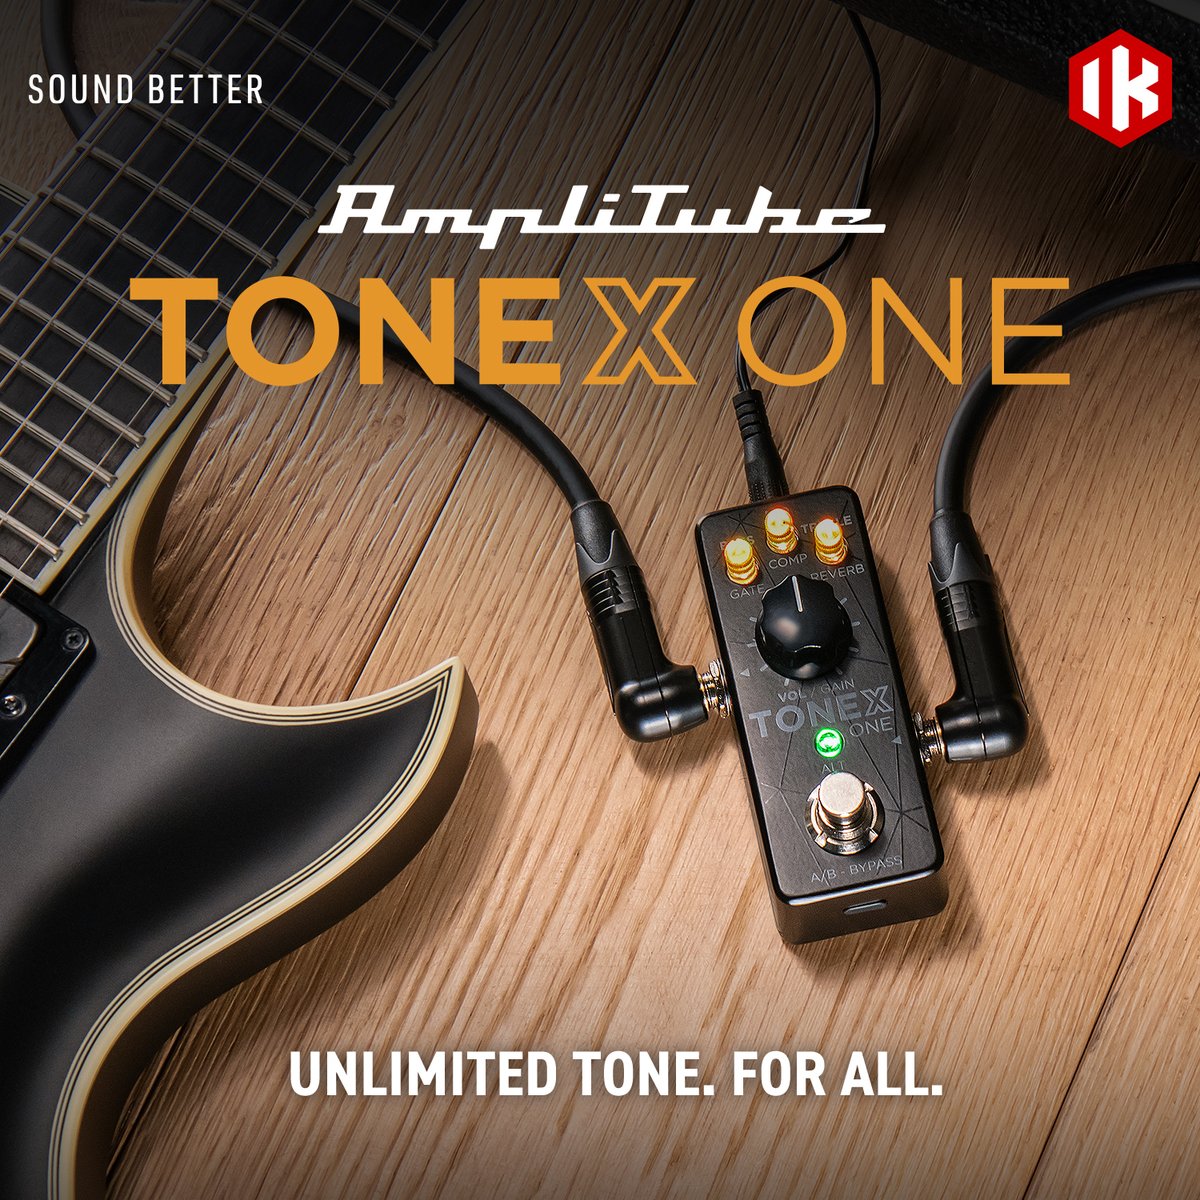 We are so excited to share with you a new groundbreaking mini pedal of infinite tone possibilities, making our revolutionary AI Machine Modeling technology accessible on any size pedalboard. 

This is TONEX ONE. bit.ly/TONEXONEnews